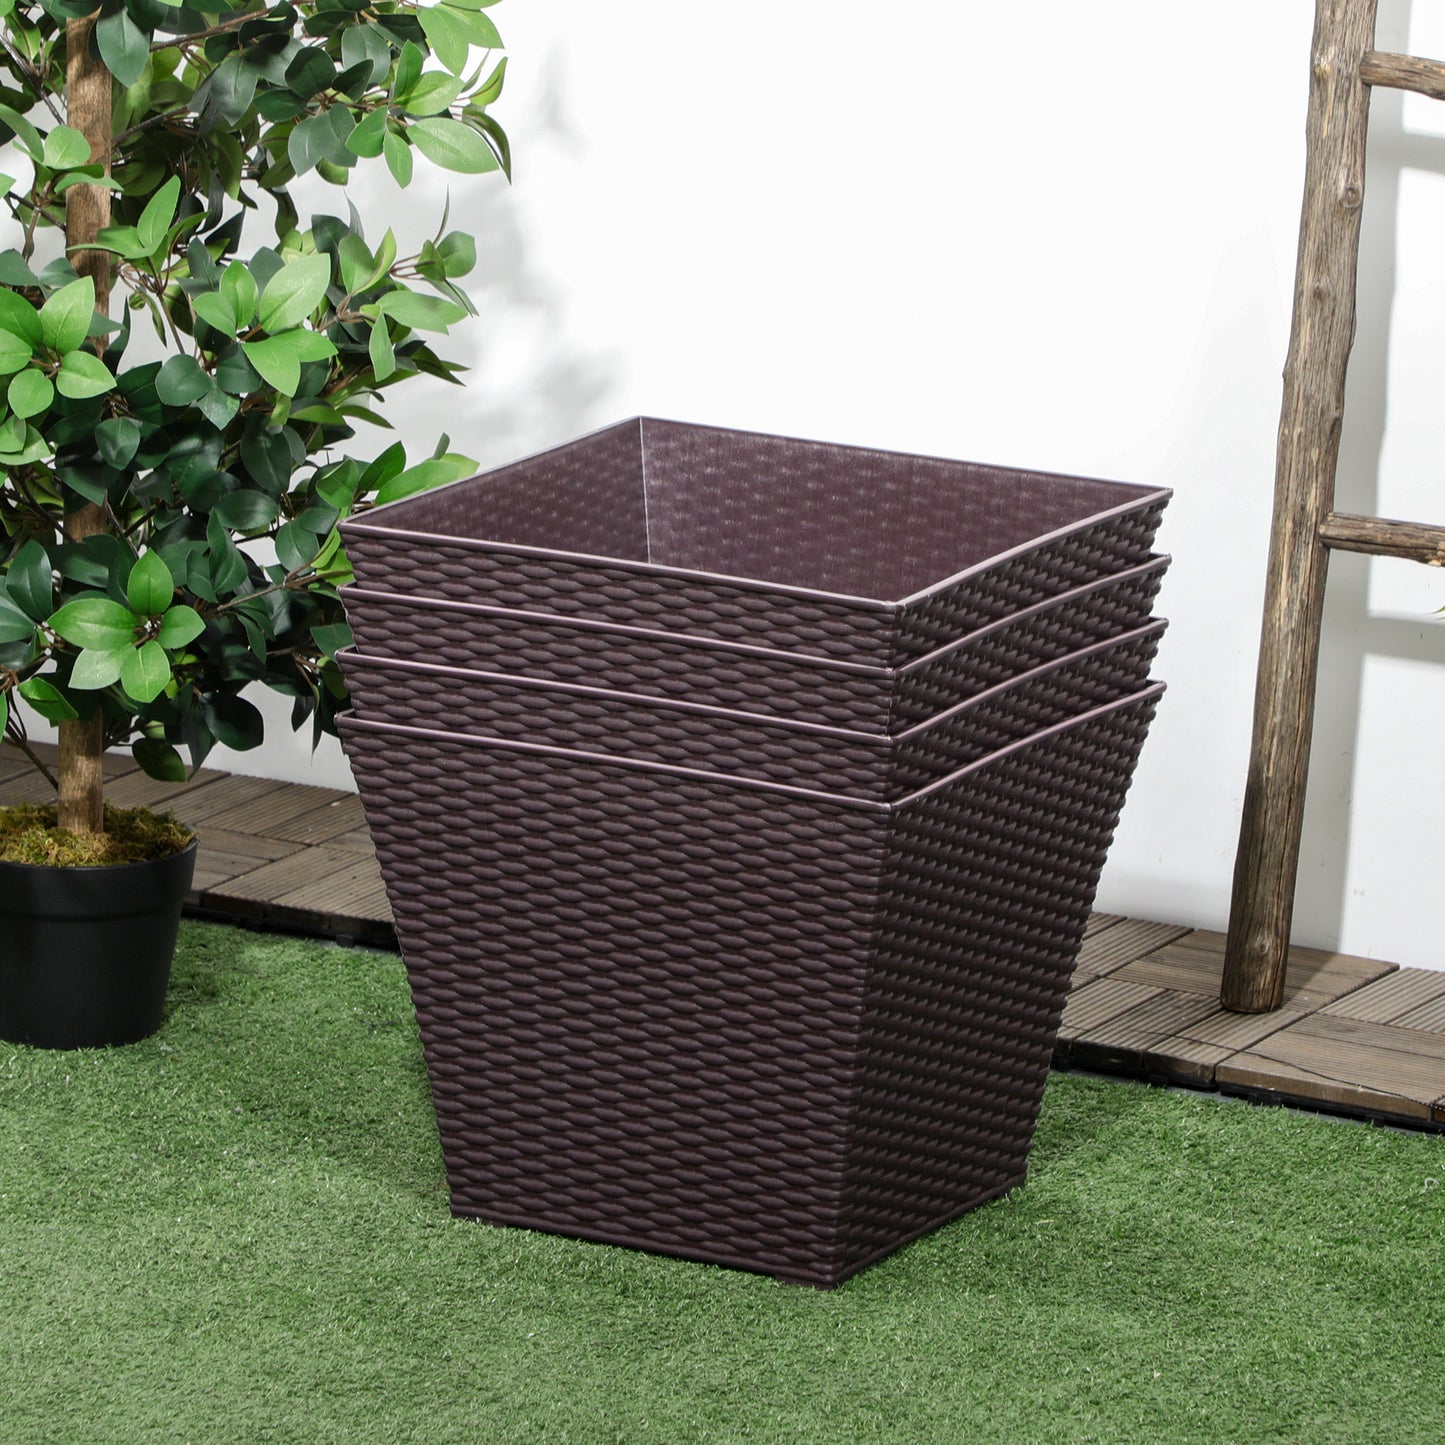 Outsunny Outdoor Planter Pack of 4, Rattan Effect Plant Pots Indoor Stackable Design, for Garden Patio Porch Deck, Brown